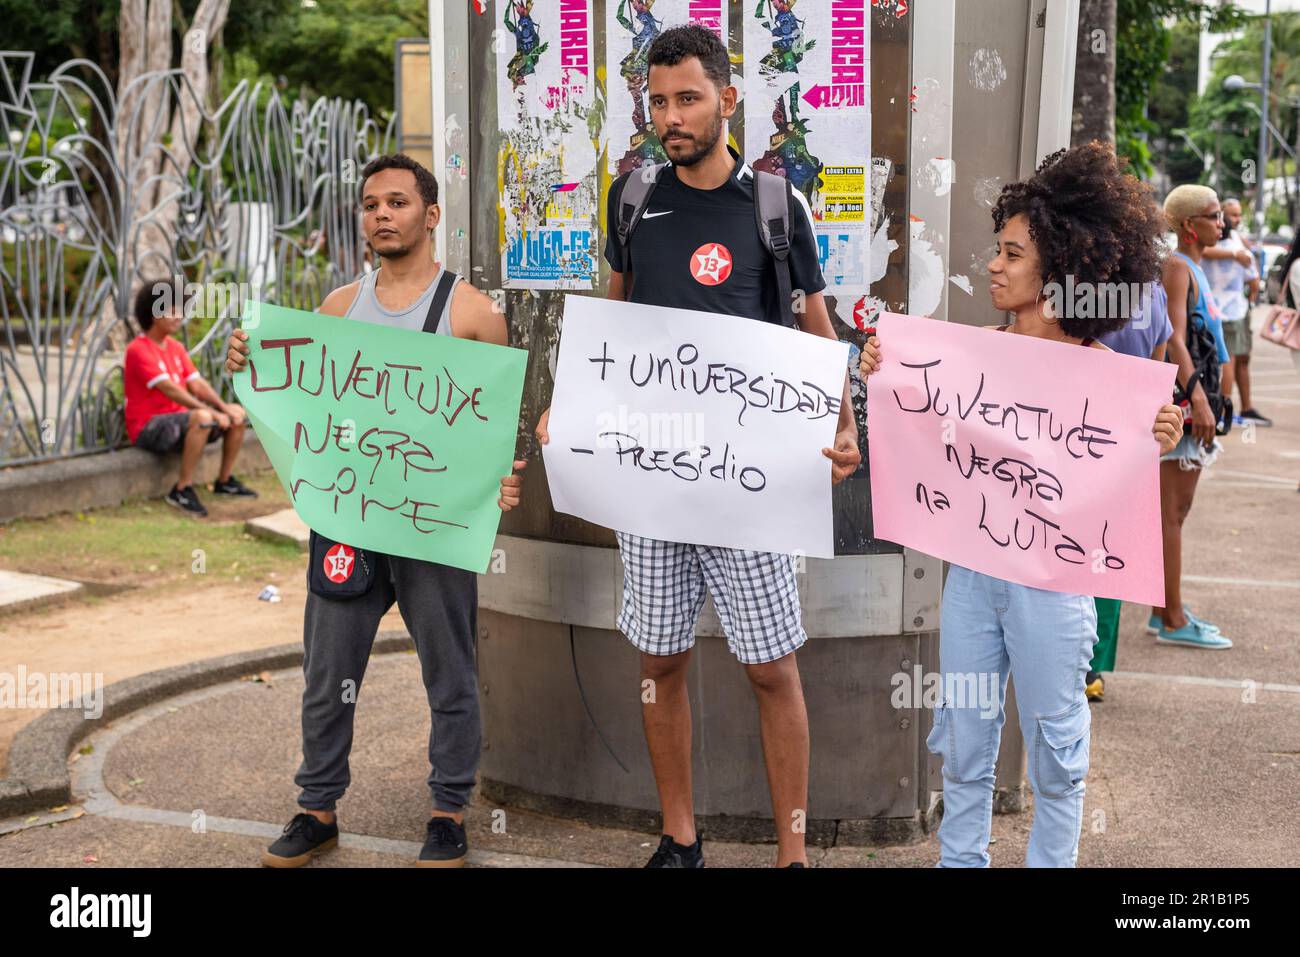 Salvador, Bahia, Brazil - October 29, 2022: Young people are seen with protest signs at the Marcha do Empoderamento Crespo, in the city of Salvador, B Stock Photo